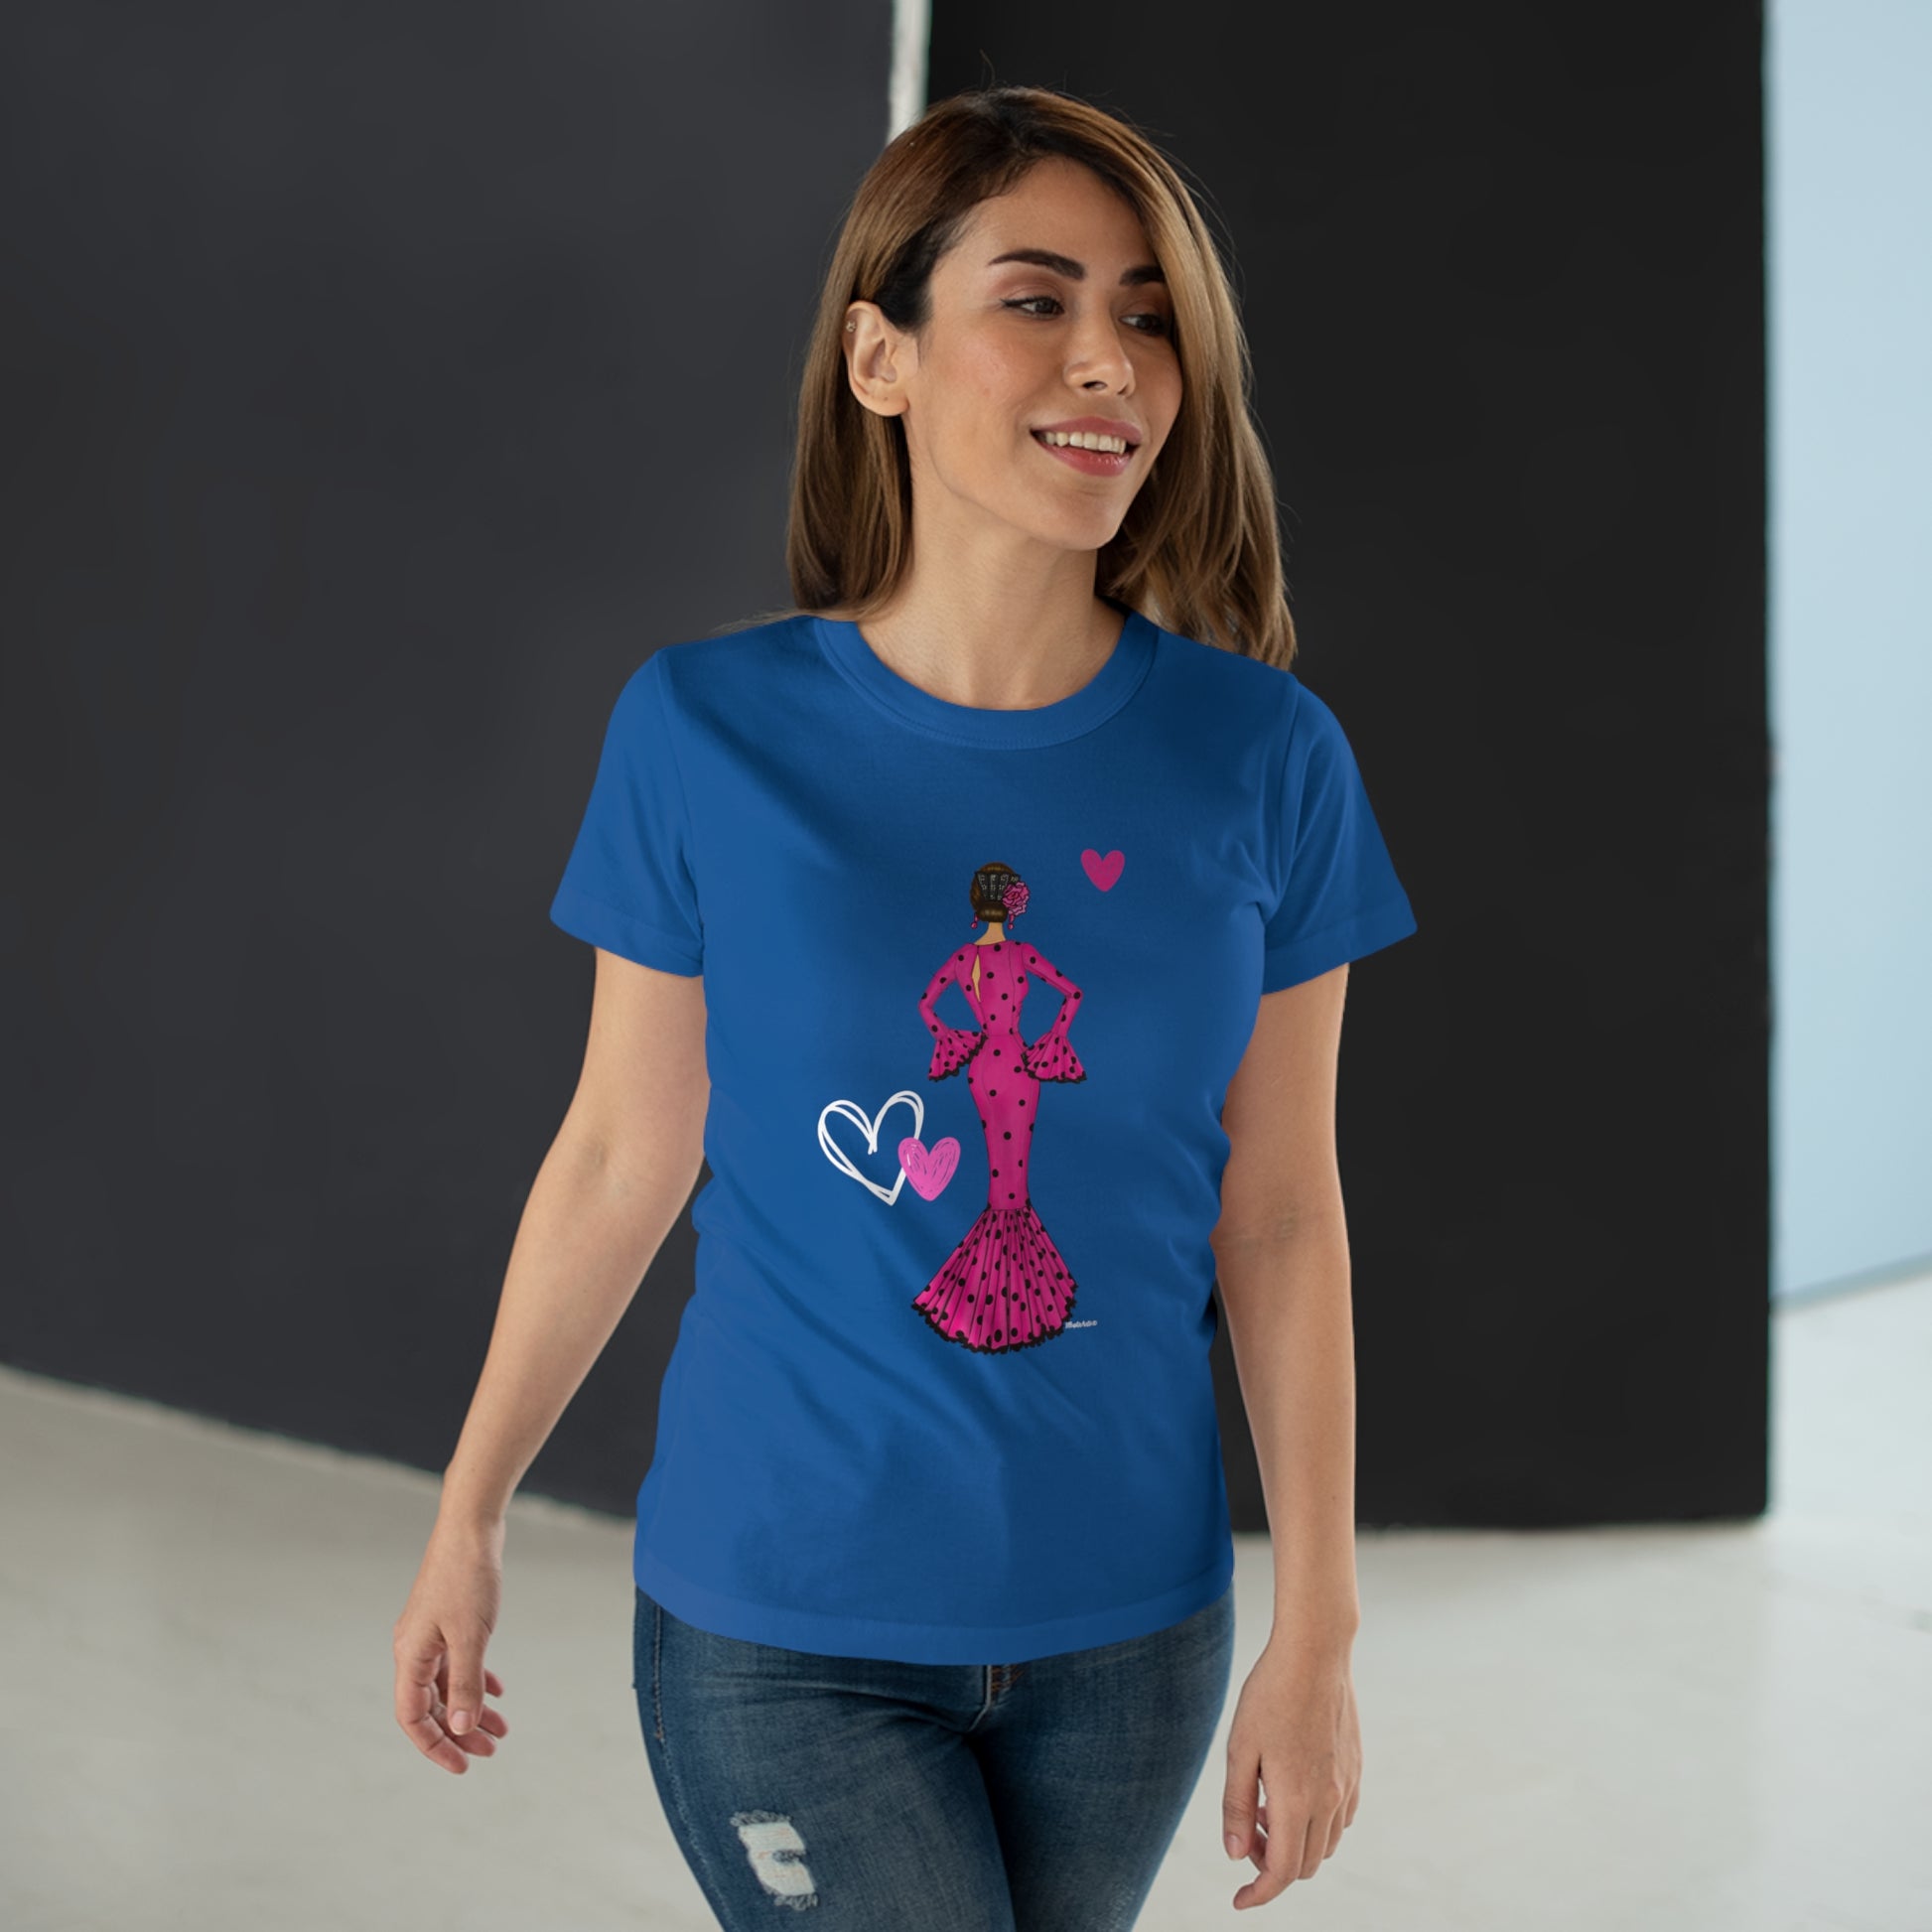 a woman wearing a blue t - shirt with a pink silhouette of a woman